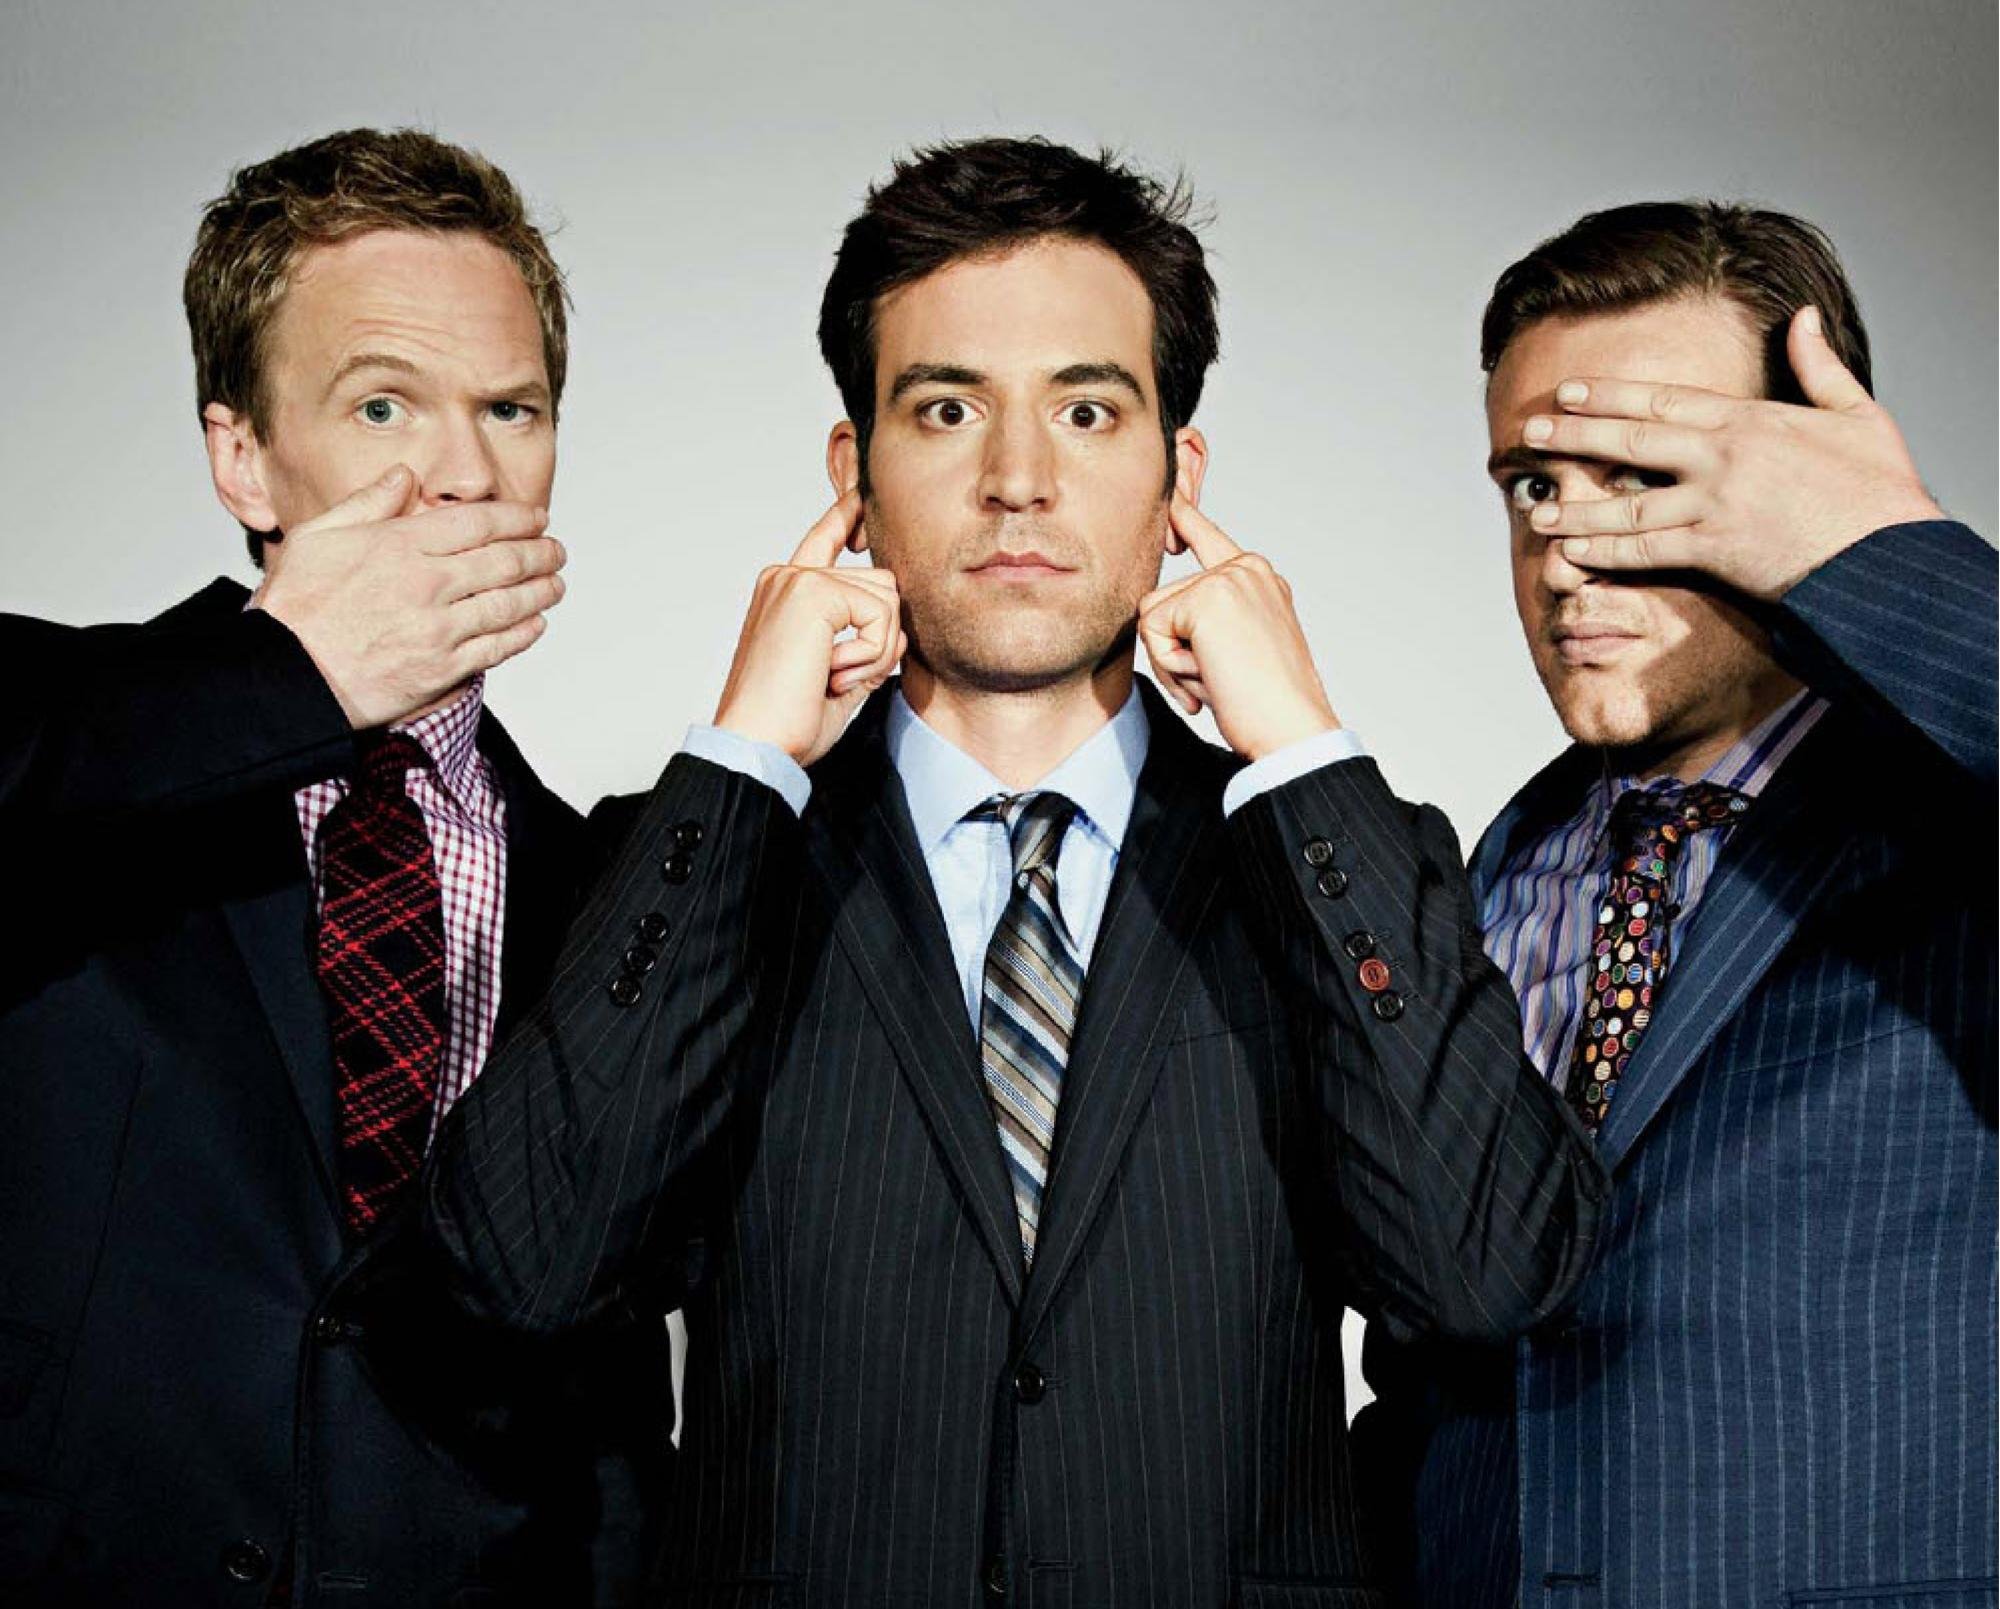 how i met your mother, Comedy, Sitcom, Series, Television, How, Met, Mother,  32 Wallpaper